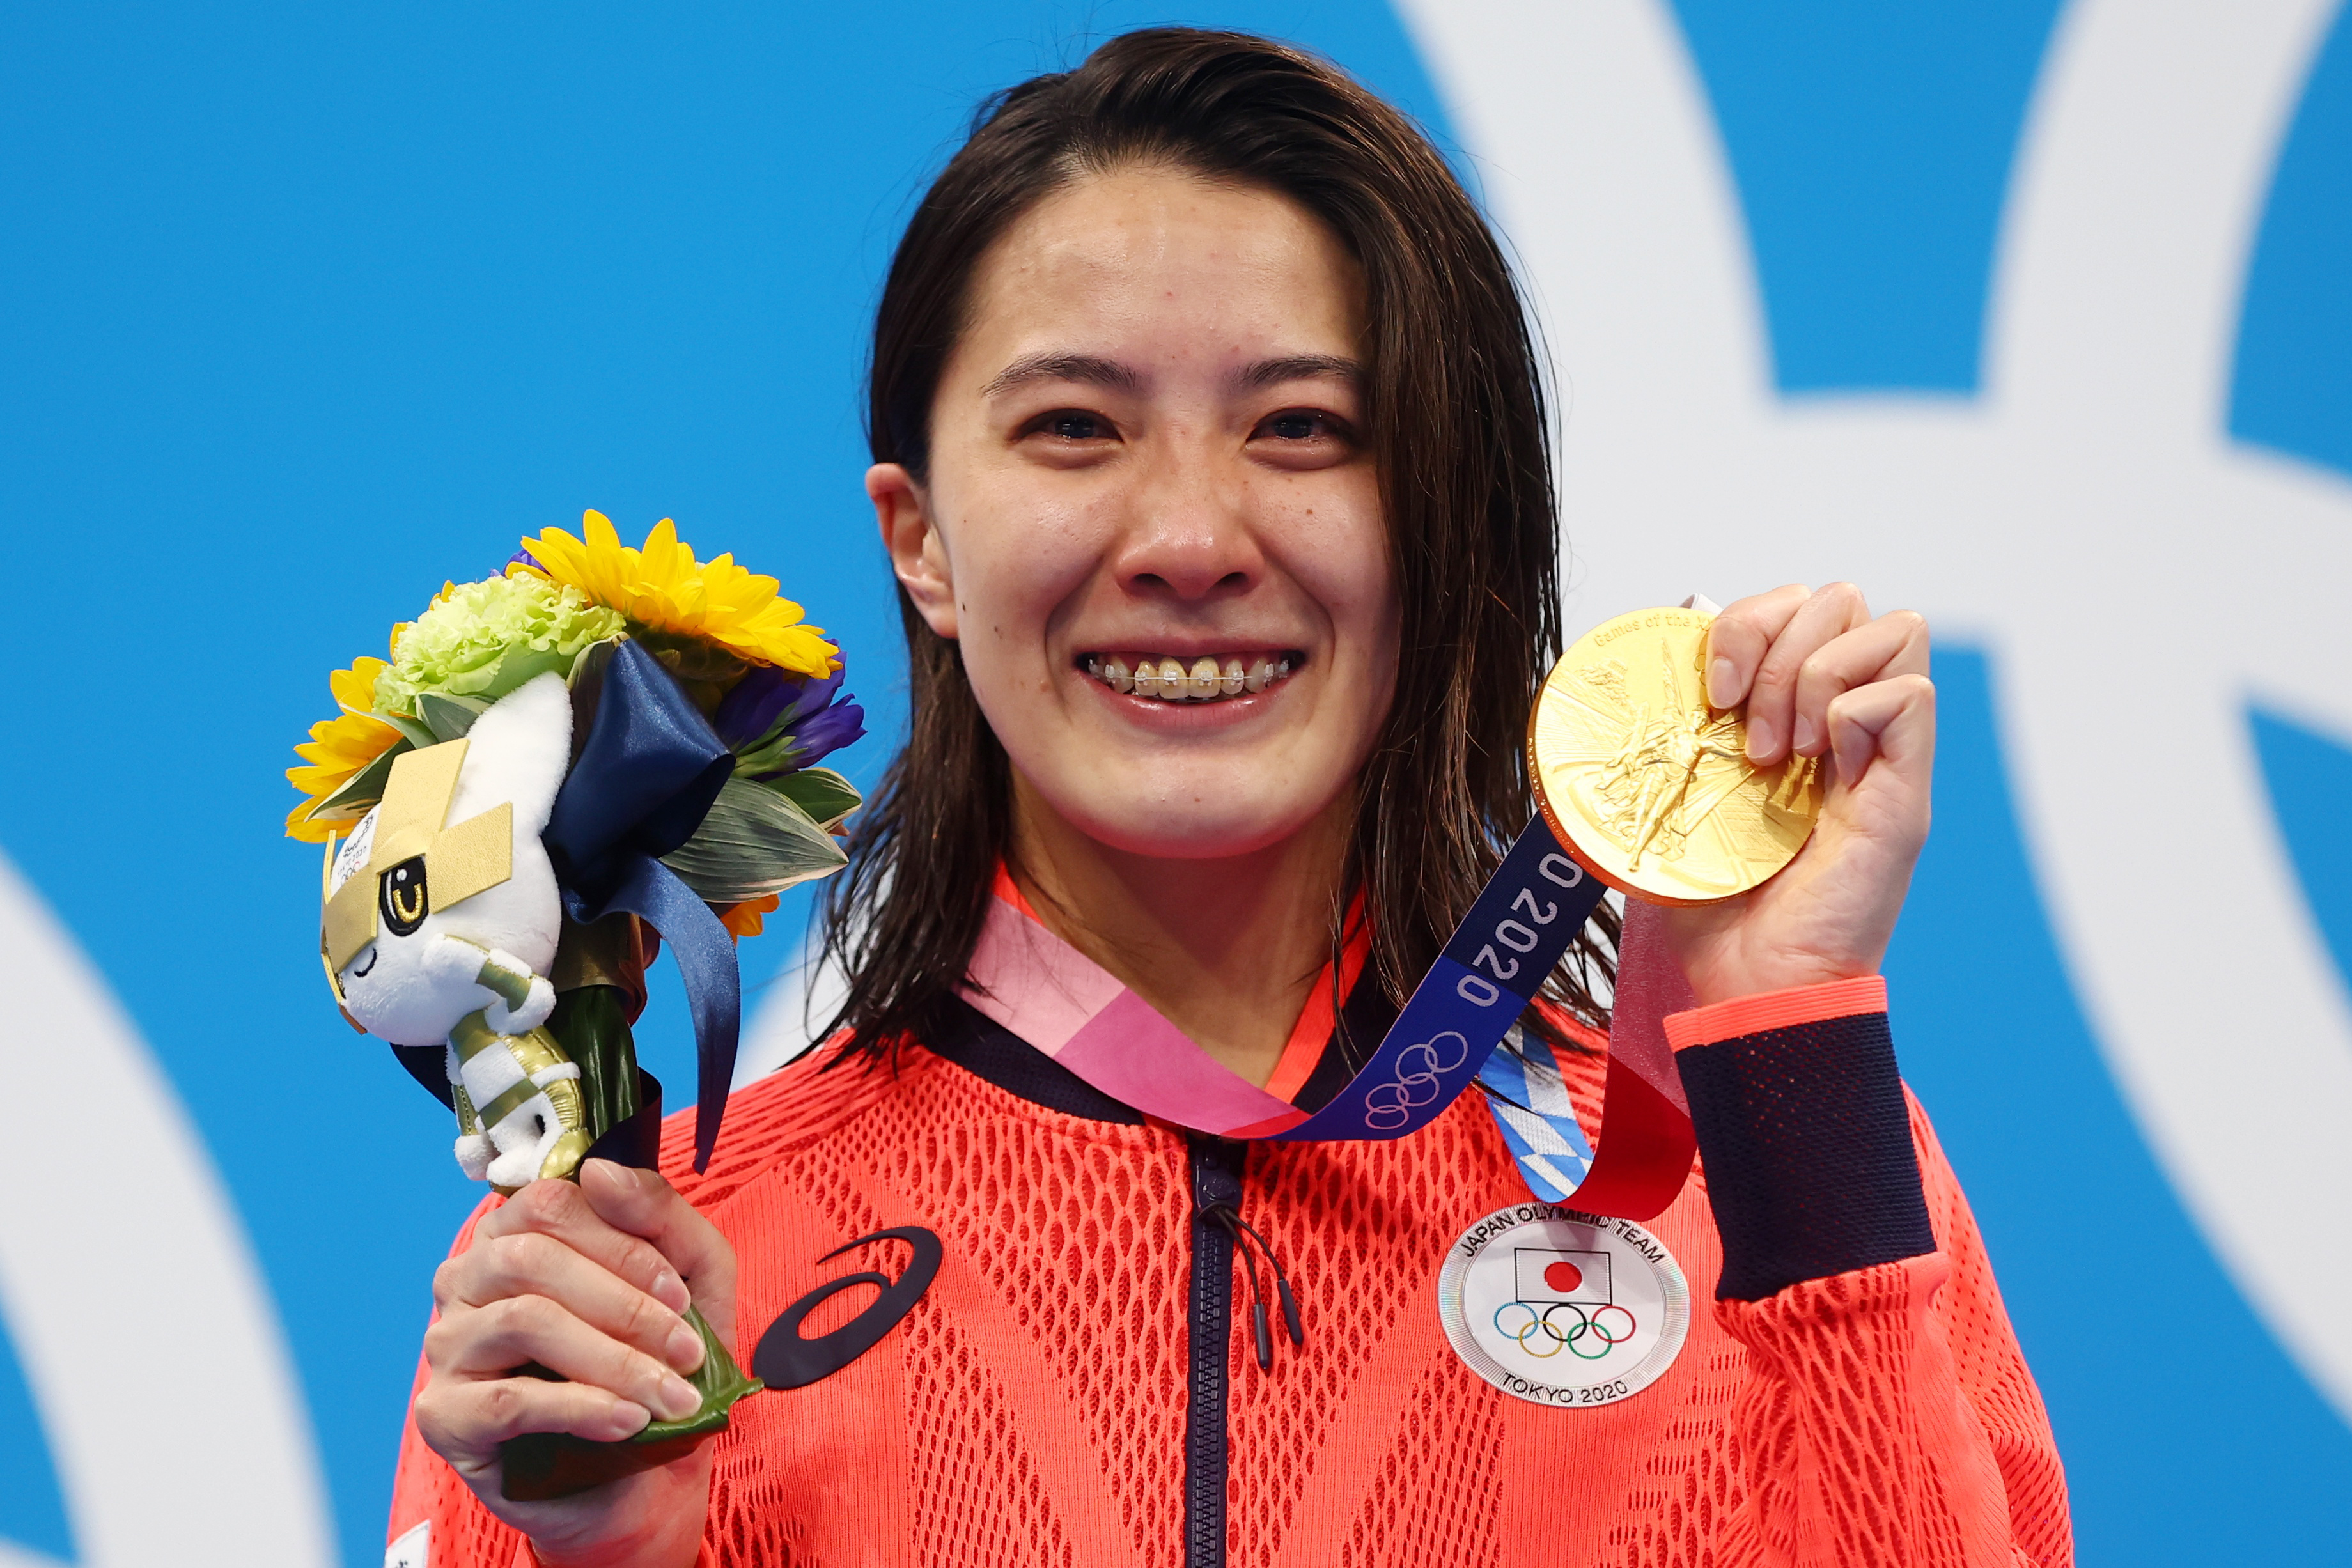 Swimming - Women's 400m Individual Medley - Medal Ceremony